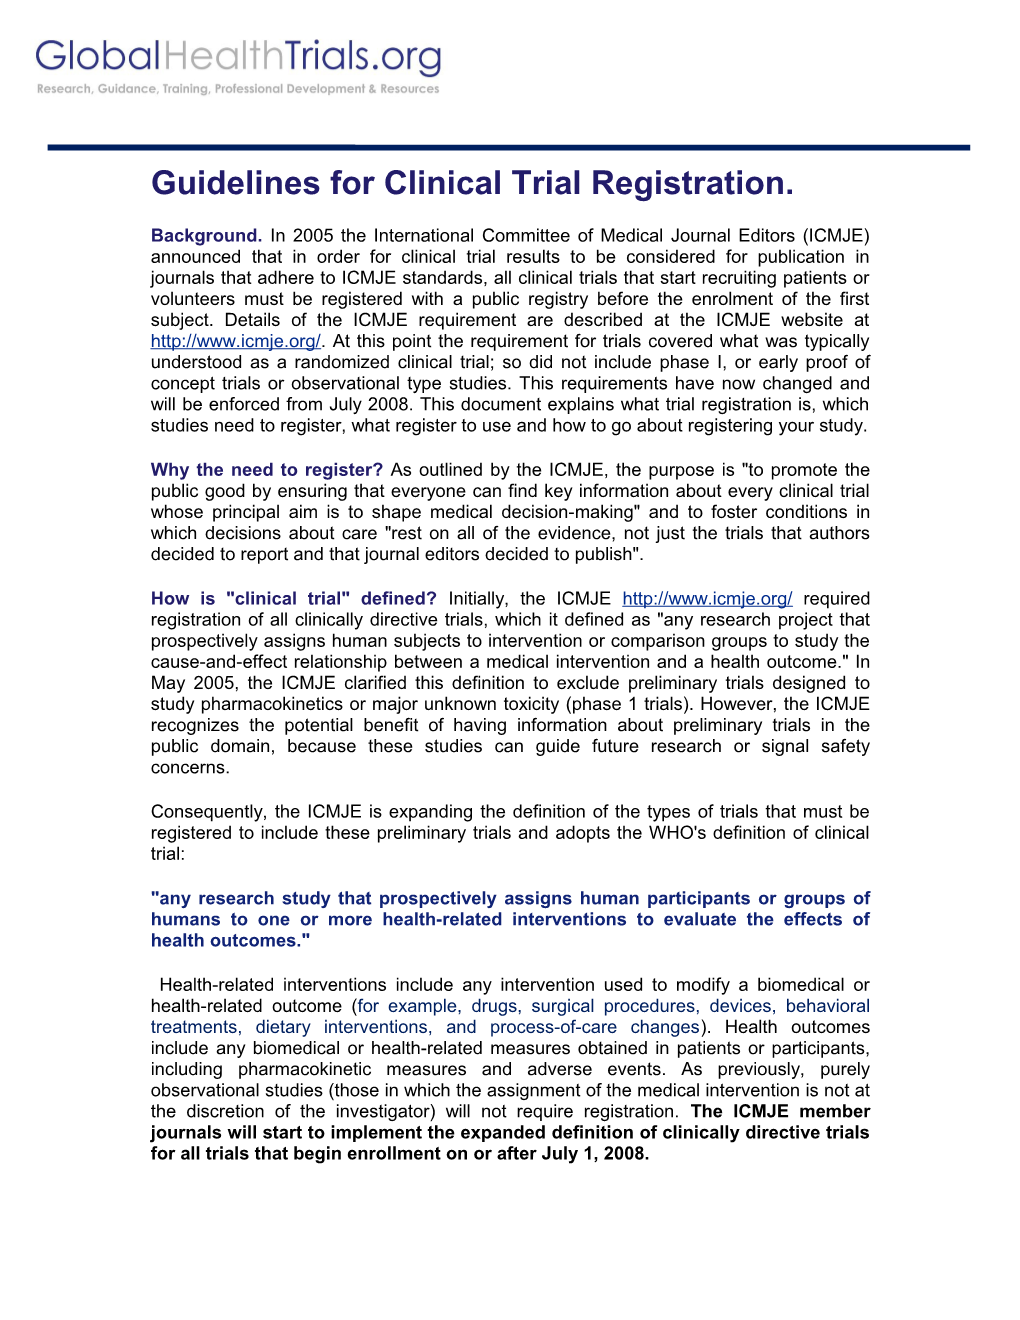 Guidelines for Clinical Trial Registration